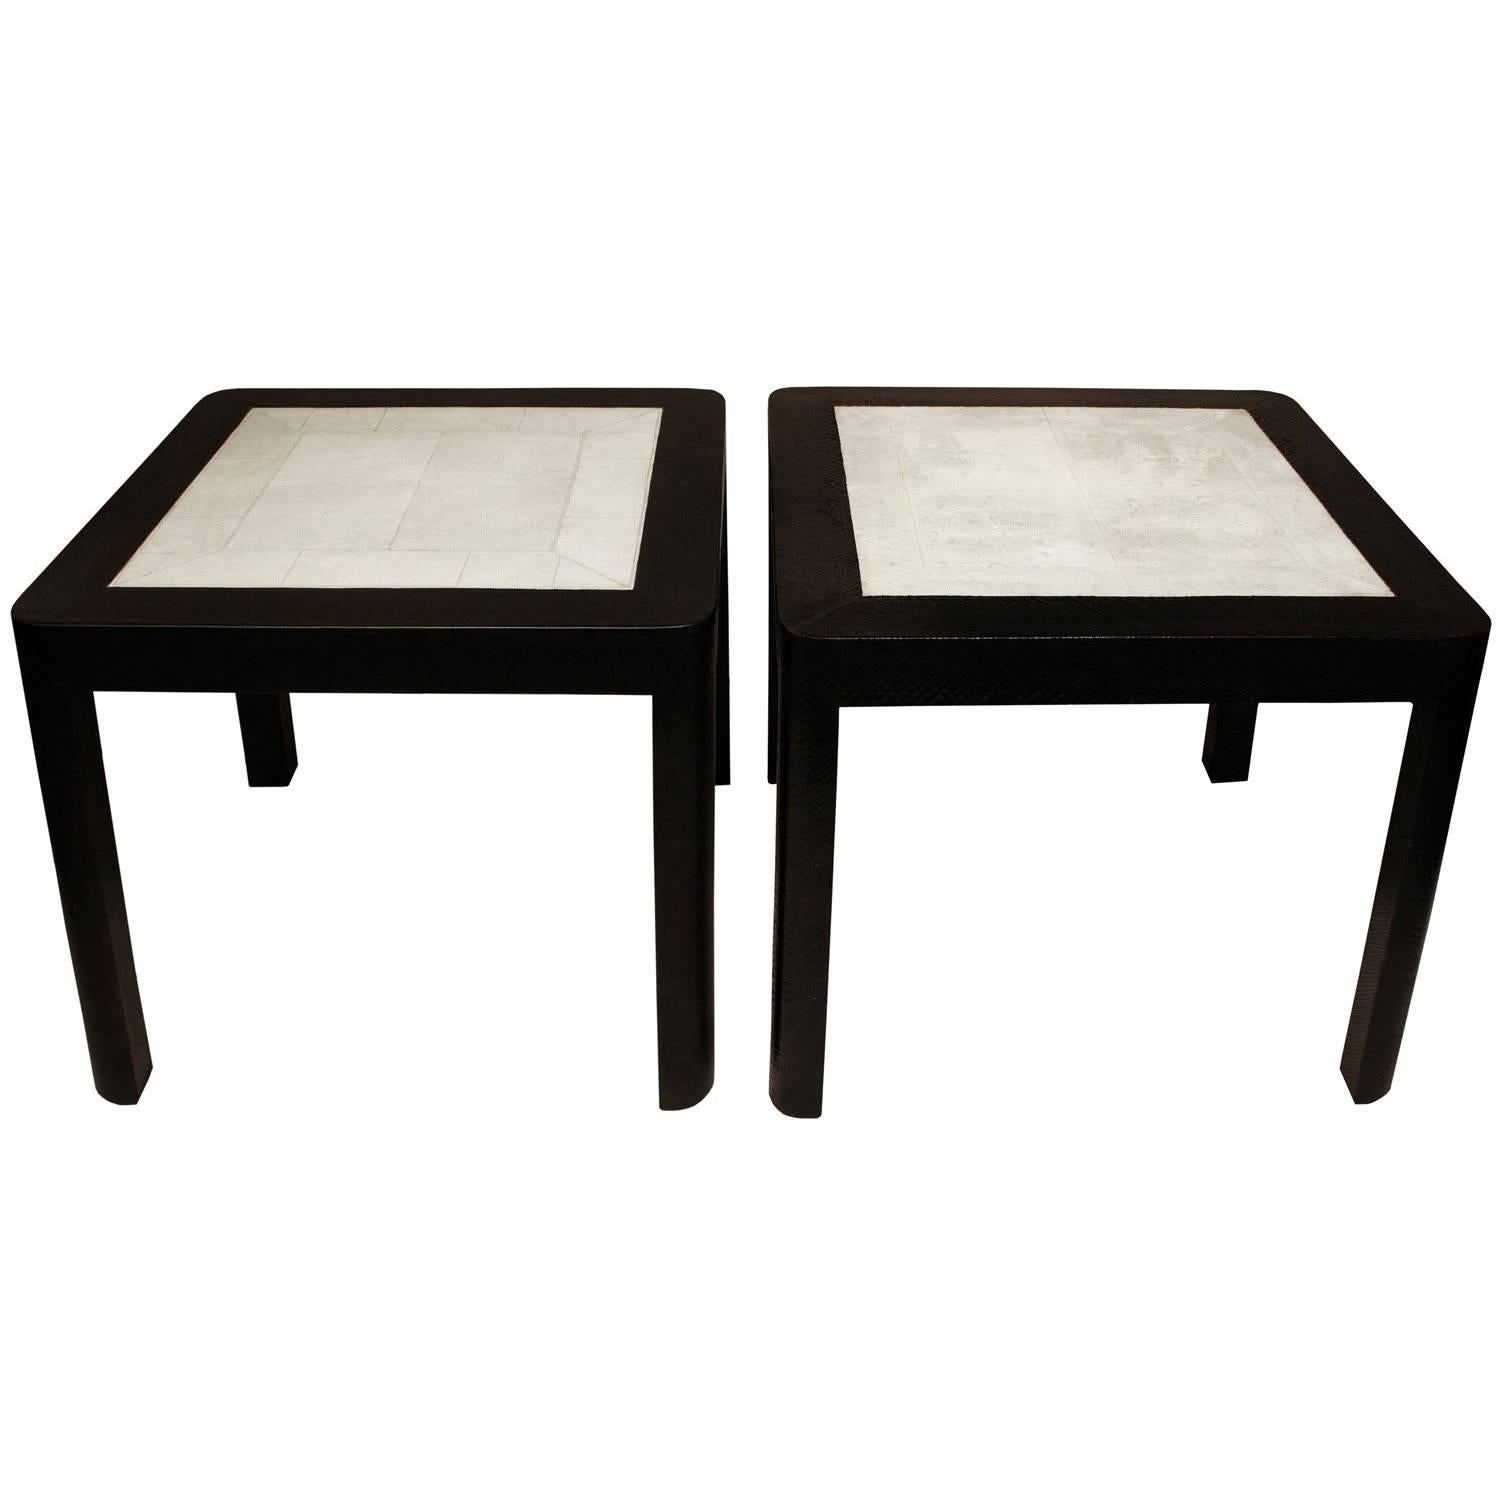 Karl Springer End Tables with Shagreen Tops, 1980s